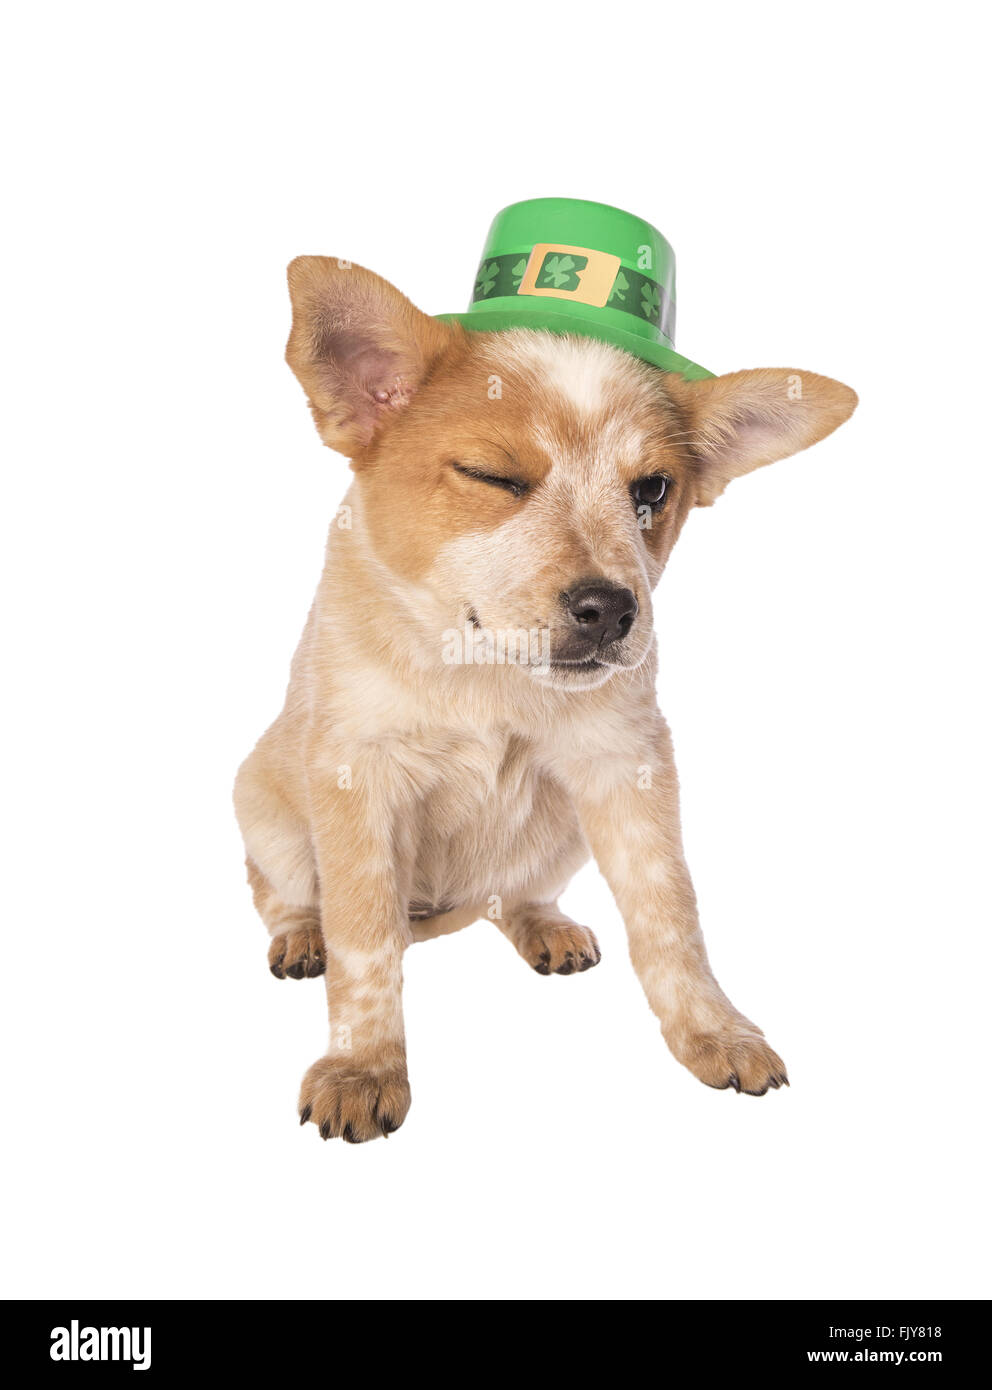 Australian cattle dog puppy with Saint Patrick's Day hat isolated on white Stock Photo